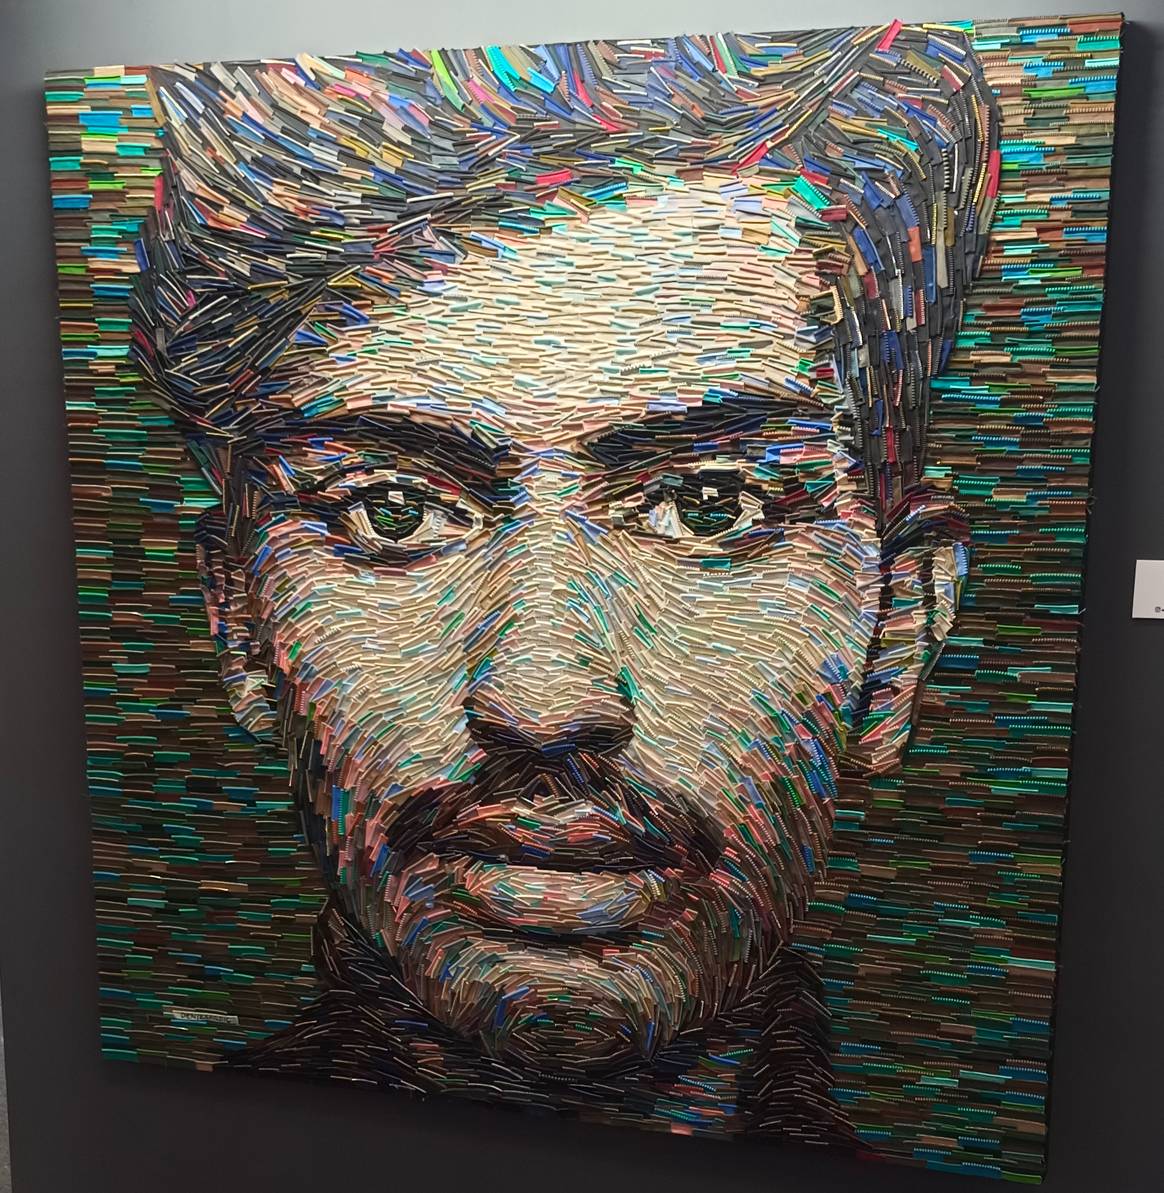 Portrait made out of old zippers by Deniz Sagdic. Image: FashionUnited